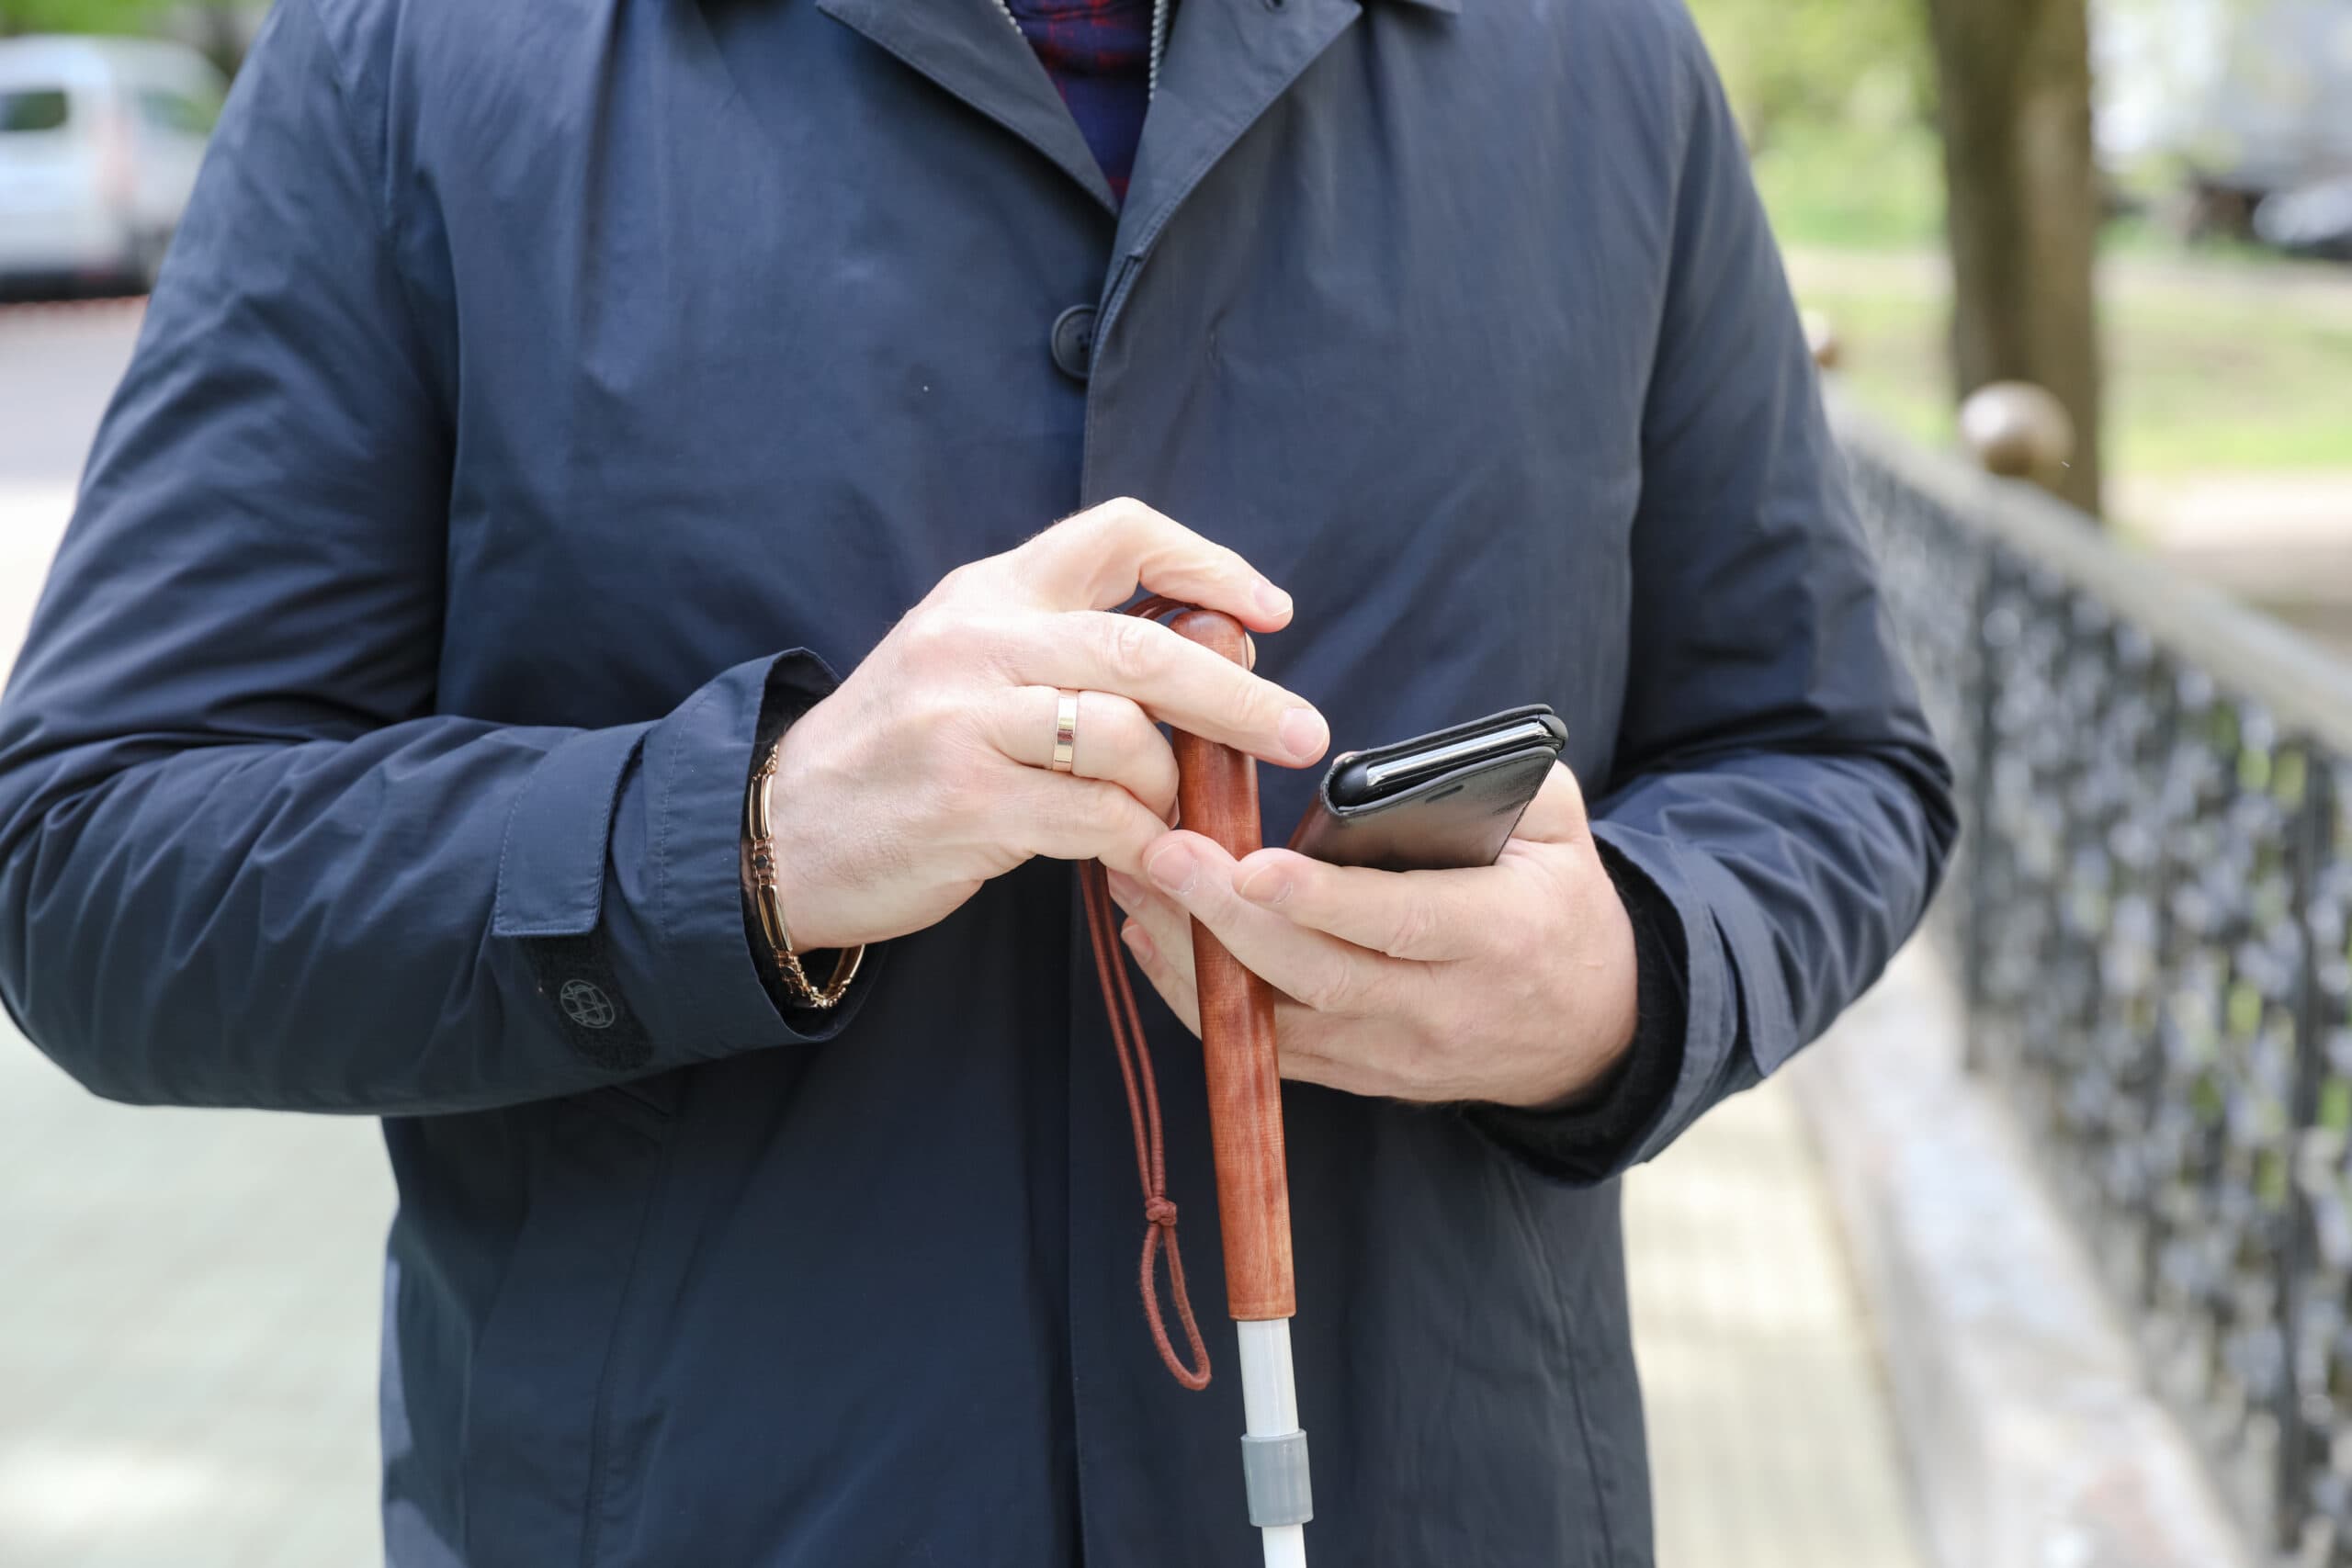 A man is outside, holding his white cane and phone in his hands